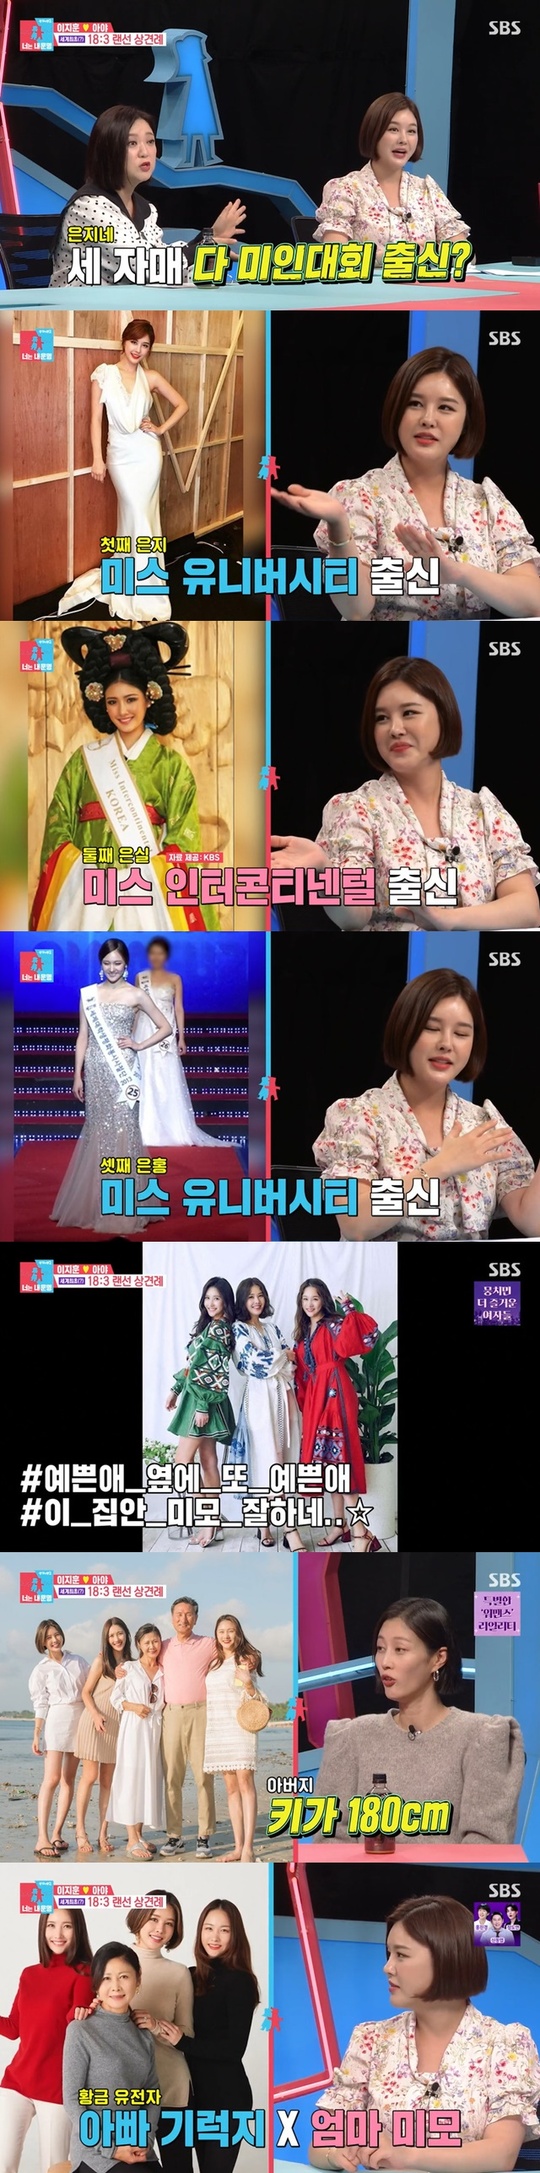 Park Eun-ji cited his fathers height and his mothers beautiful look as the secret to three sisters beautiful look.On SBS Same Bed, Different Dreams 2 Season 2 - You Are My Destiny broadcast on September 27, broadcaster Park Eun-ji appeared as a special MC.Park Eun-ji said that all three sisters are from a beauty pageant, and that she is Miss UNeever City, second Park Eun-ji is Miss Intercontinental, and third Eunhong is Miss UNeever City.Park Eun-ji is the secret of three sisters beautiful look, My father is 180cm tall and cool even though he is old.My mother is also a cute person. My fathers height and my mothers beautiful look.